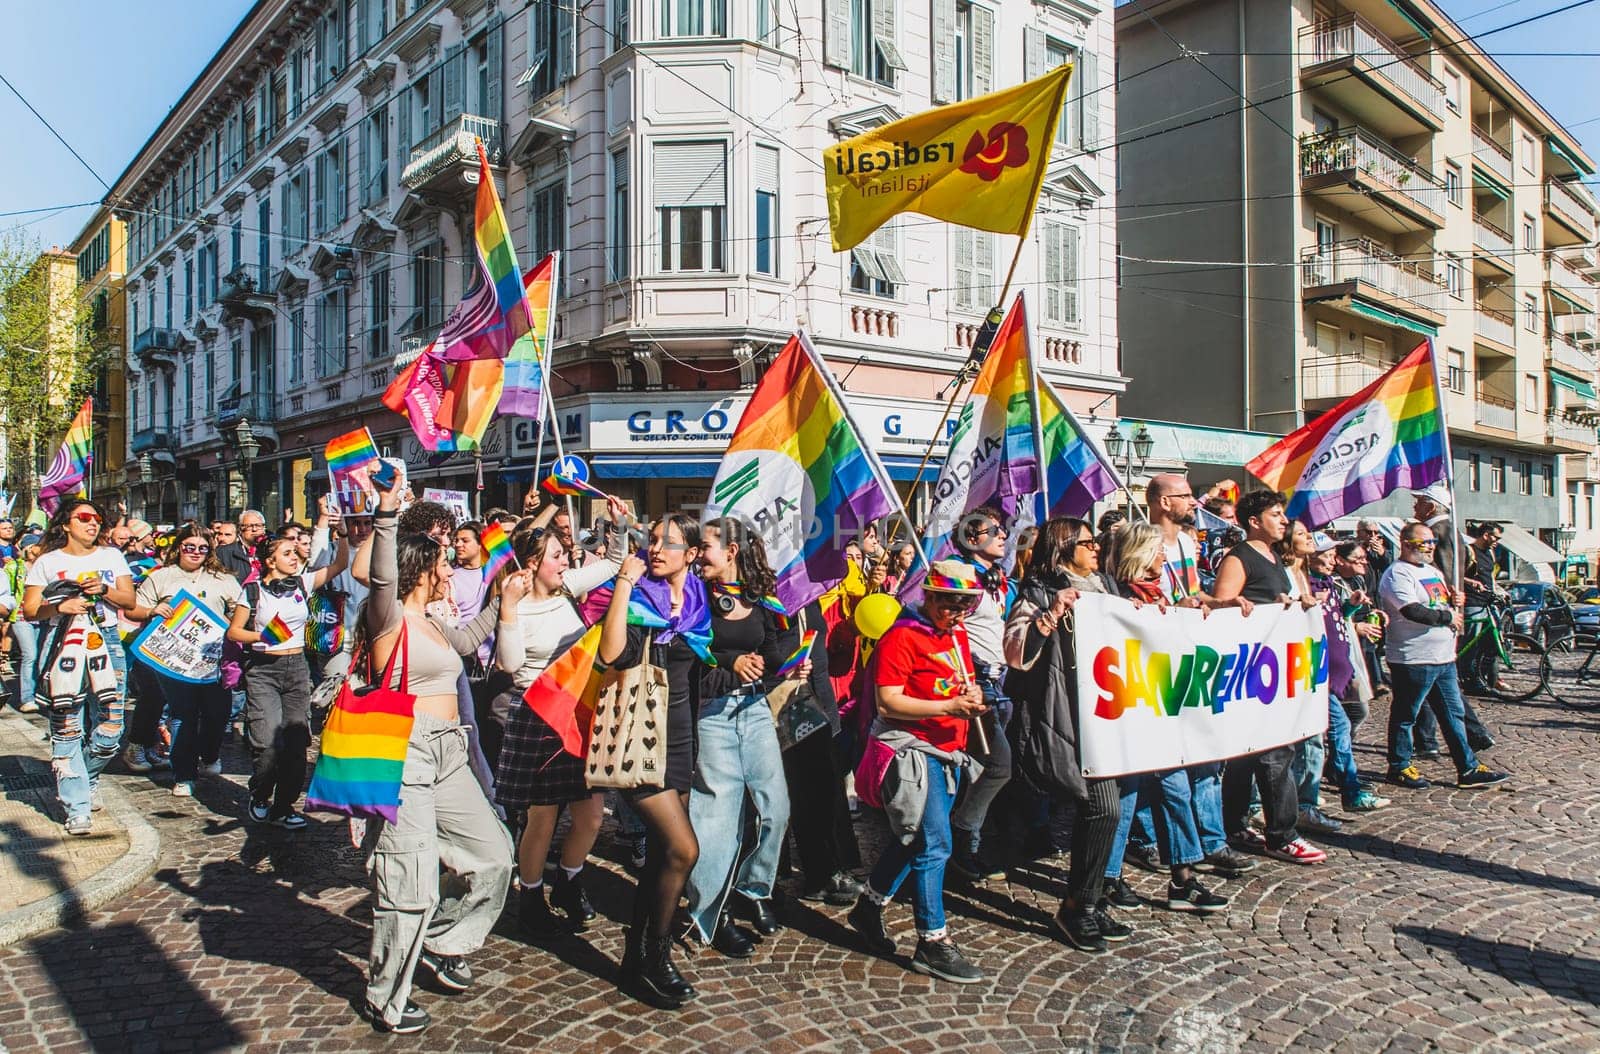 Reporting by journalists on the LGBT pride event held in Sanremo, where attendees enjoy themselves and march in the streets.